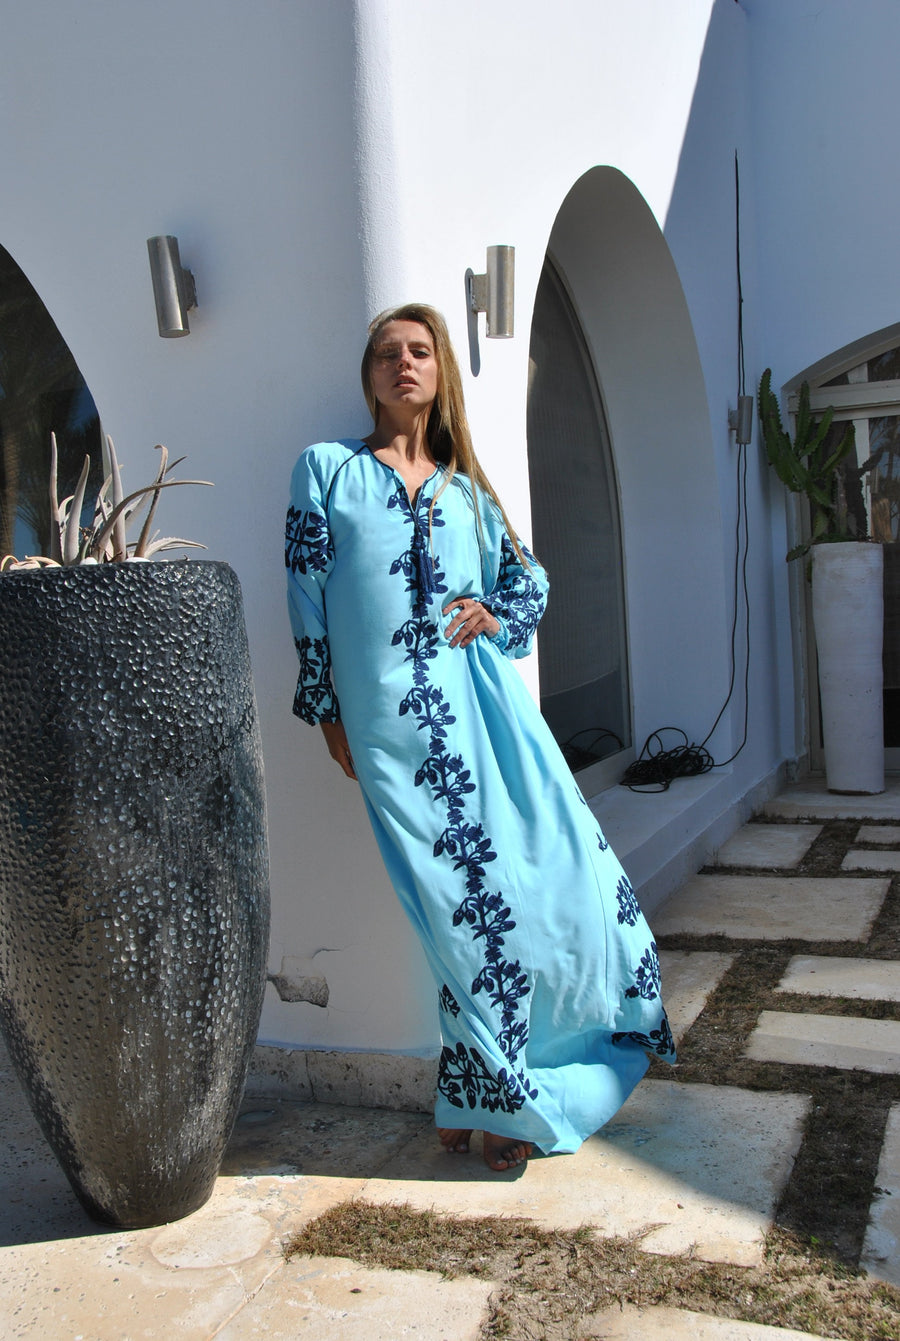 Turquoise embroidered cotton Caftan, caftans for women, Kaftan maxi, embroidered Caftan dress, Caftan maxi dress, Caftans for women, Caftans